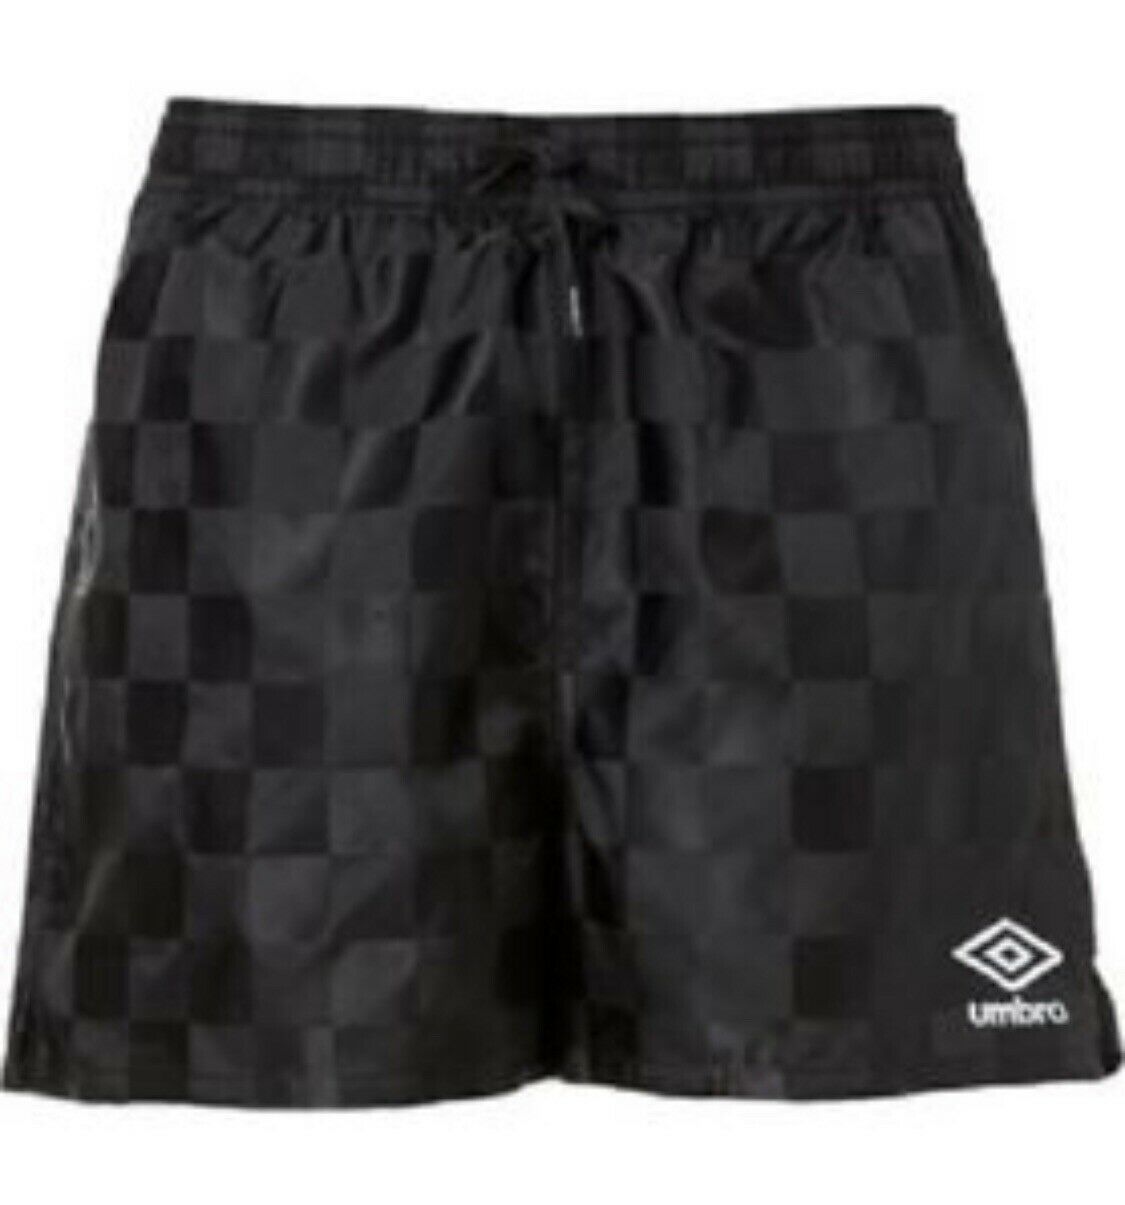 New Umbro Soccer Athletic Gym Shorts Black Youth Small (8-10)